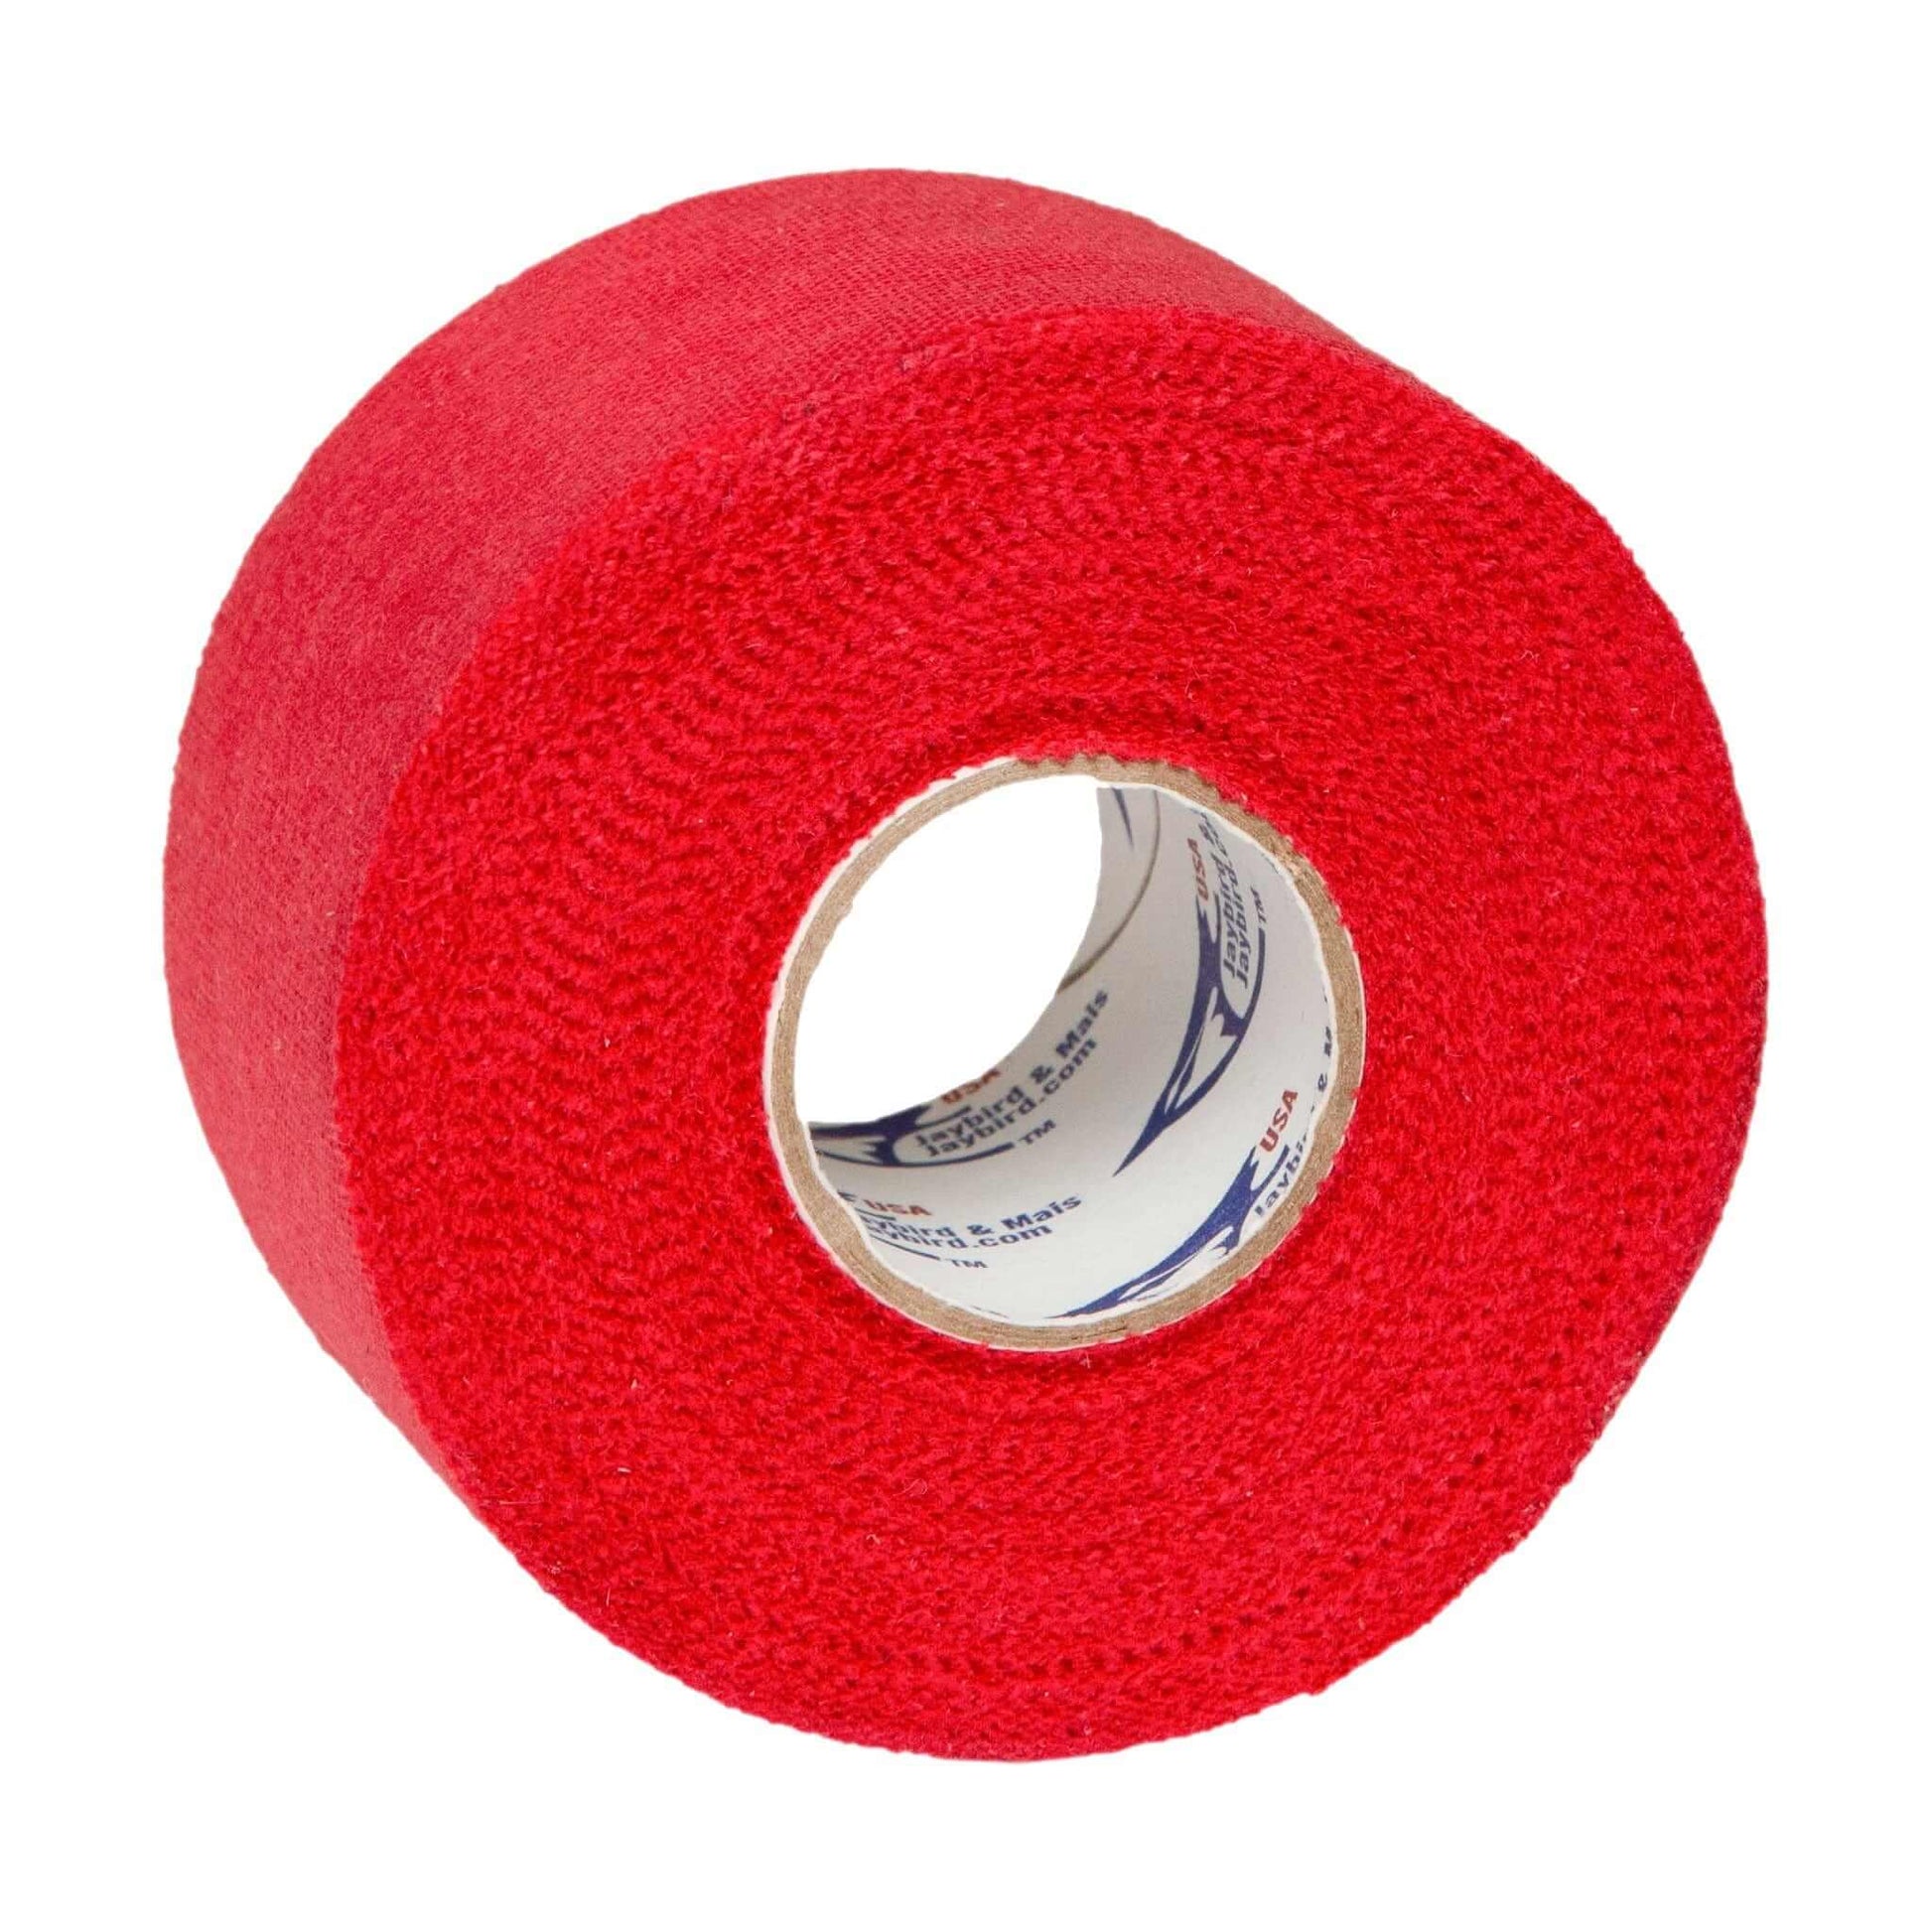 ProForce Sparring Gear red Trainers Tape 15 yards boxing